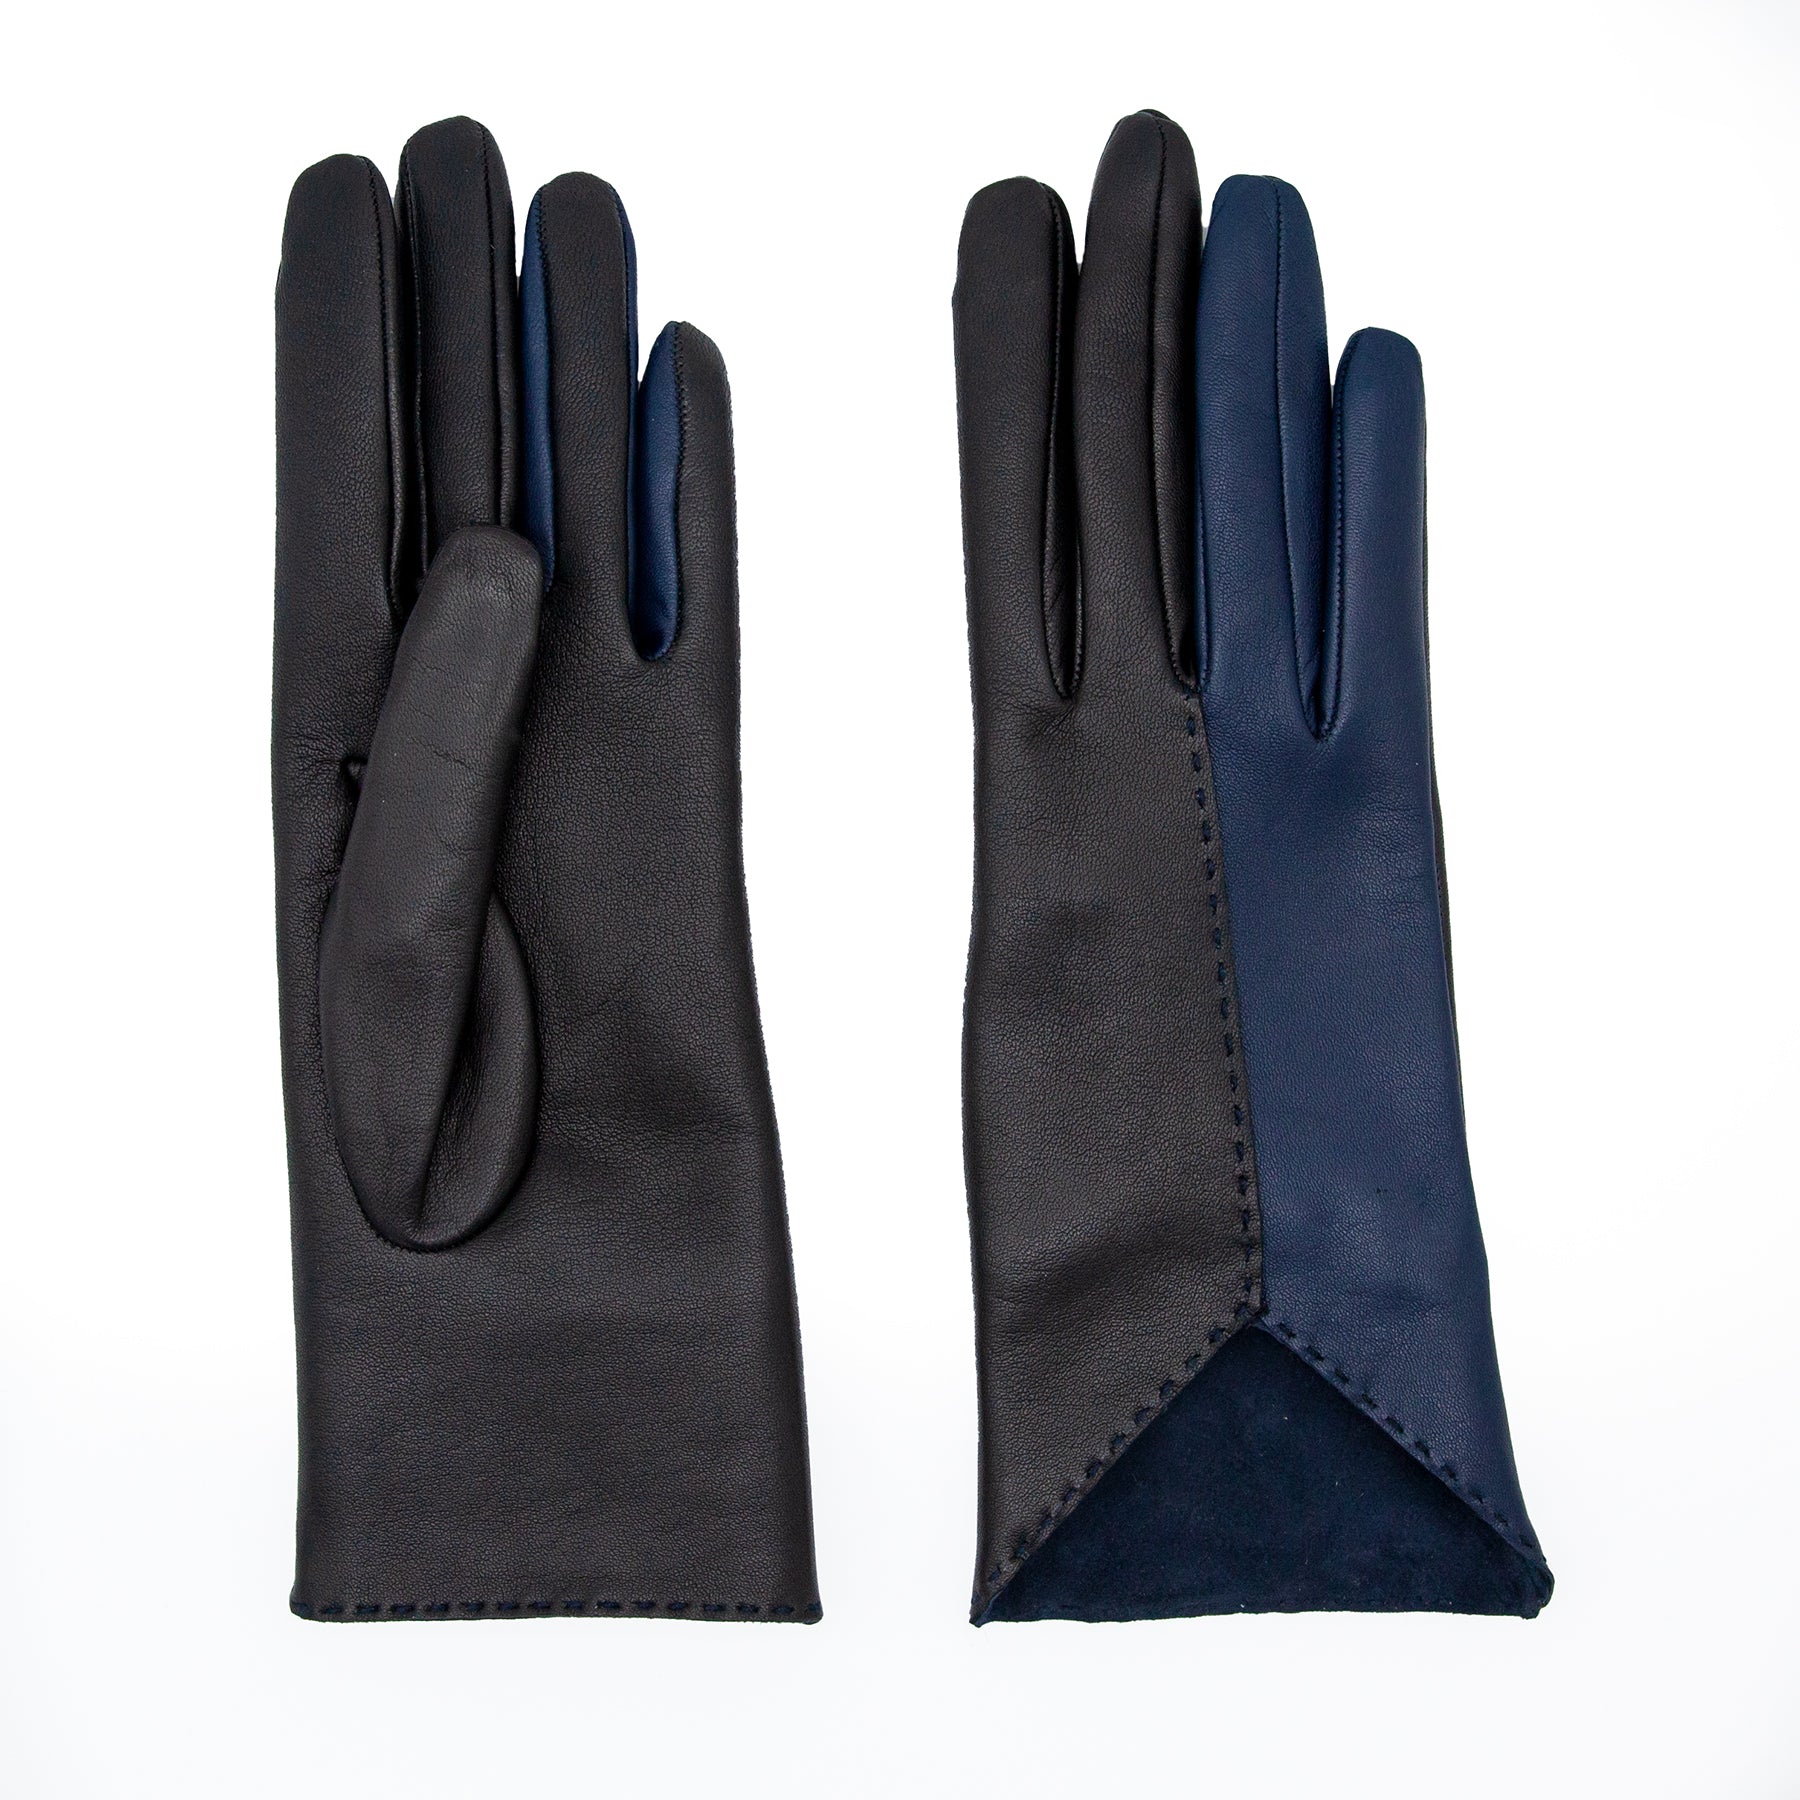 Women's blue and black metal free nappa leather gloves unlined with sustainable cashmere lining